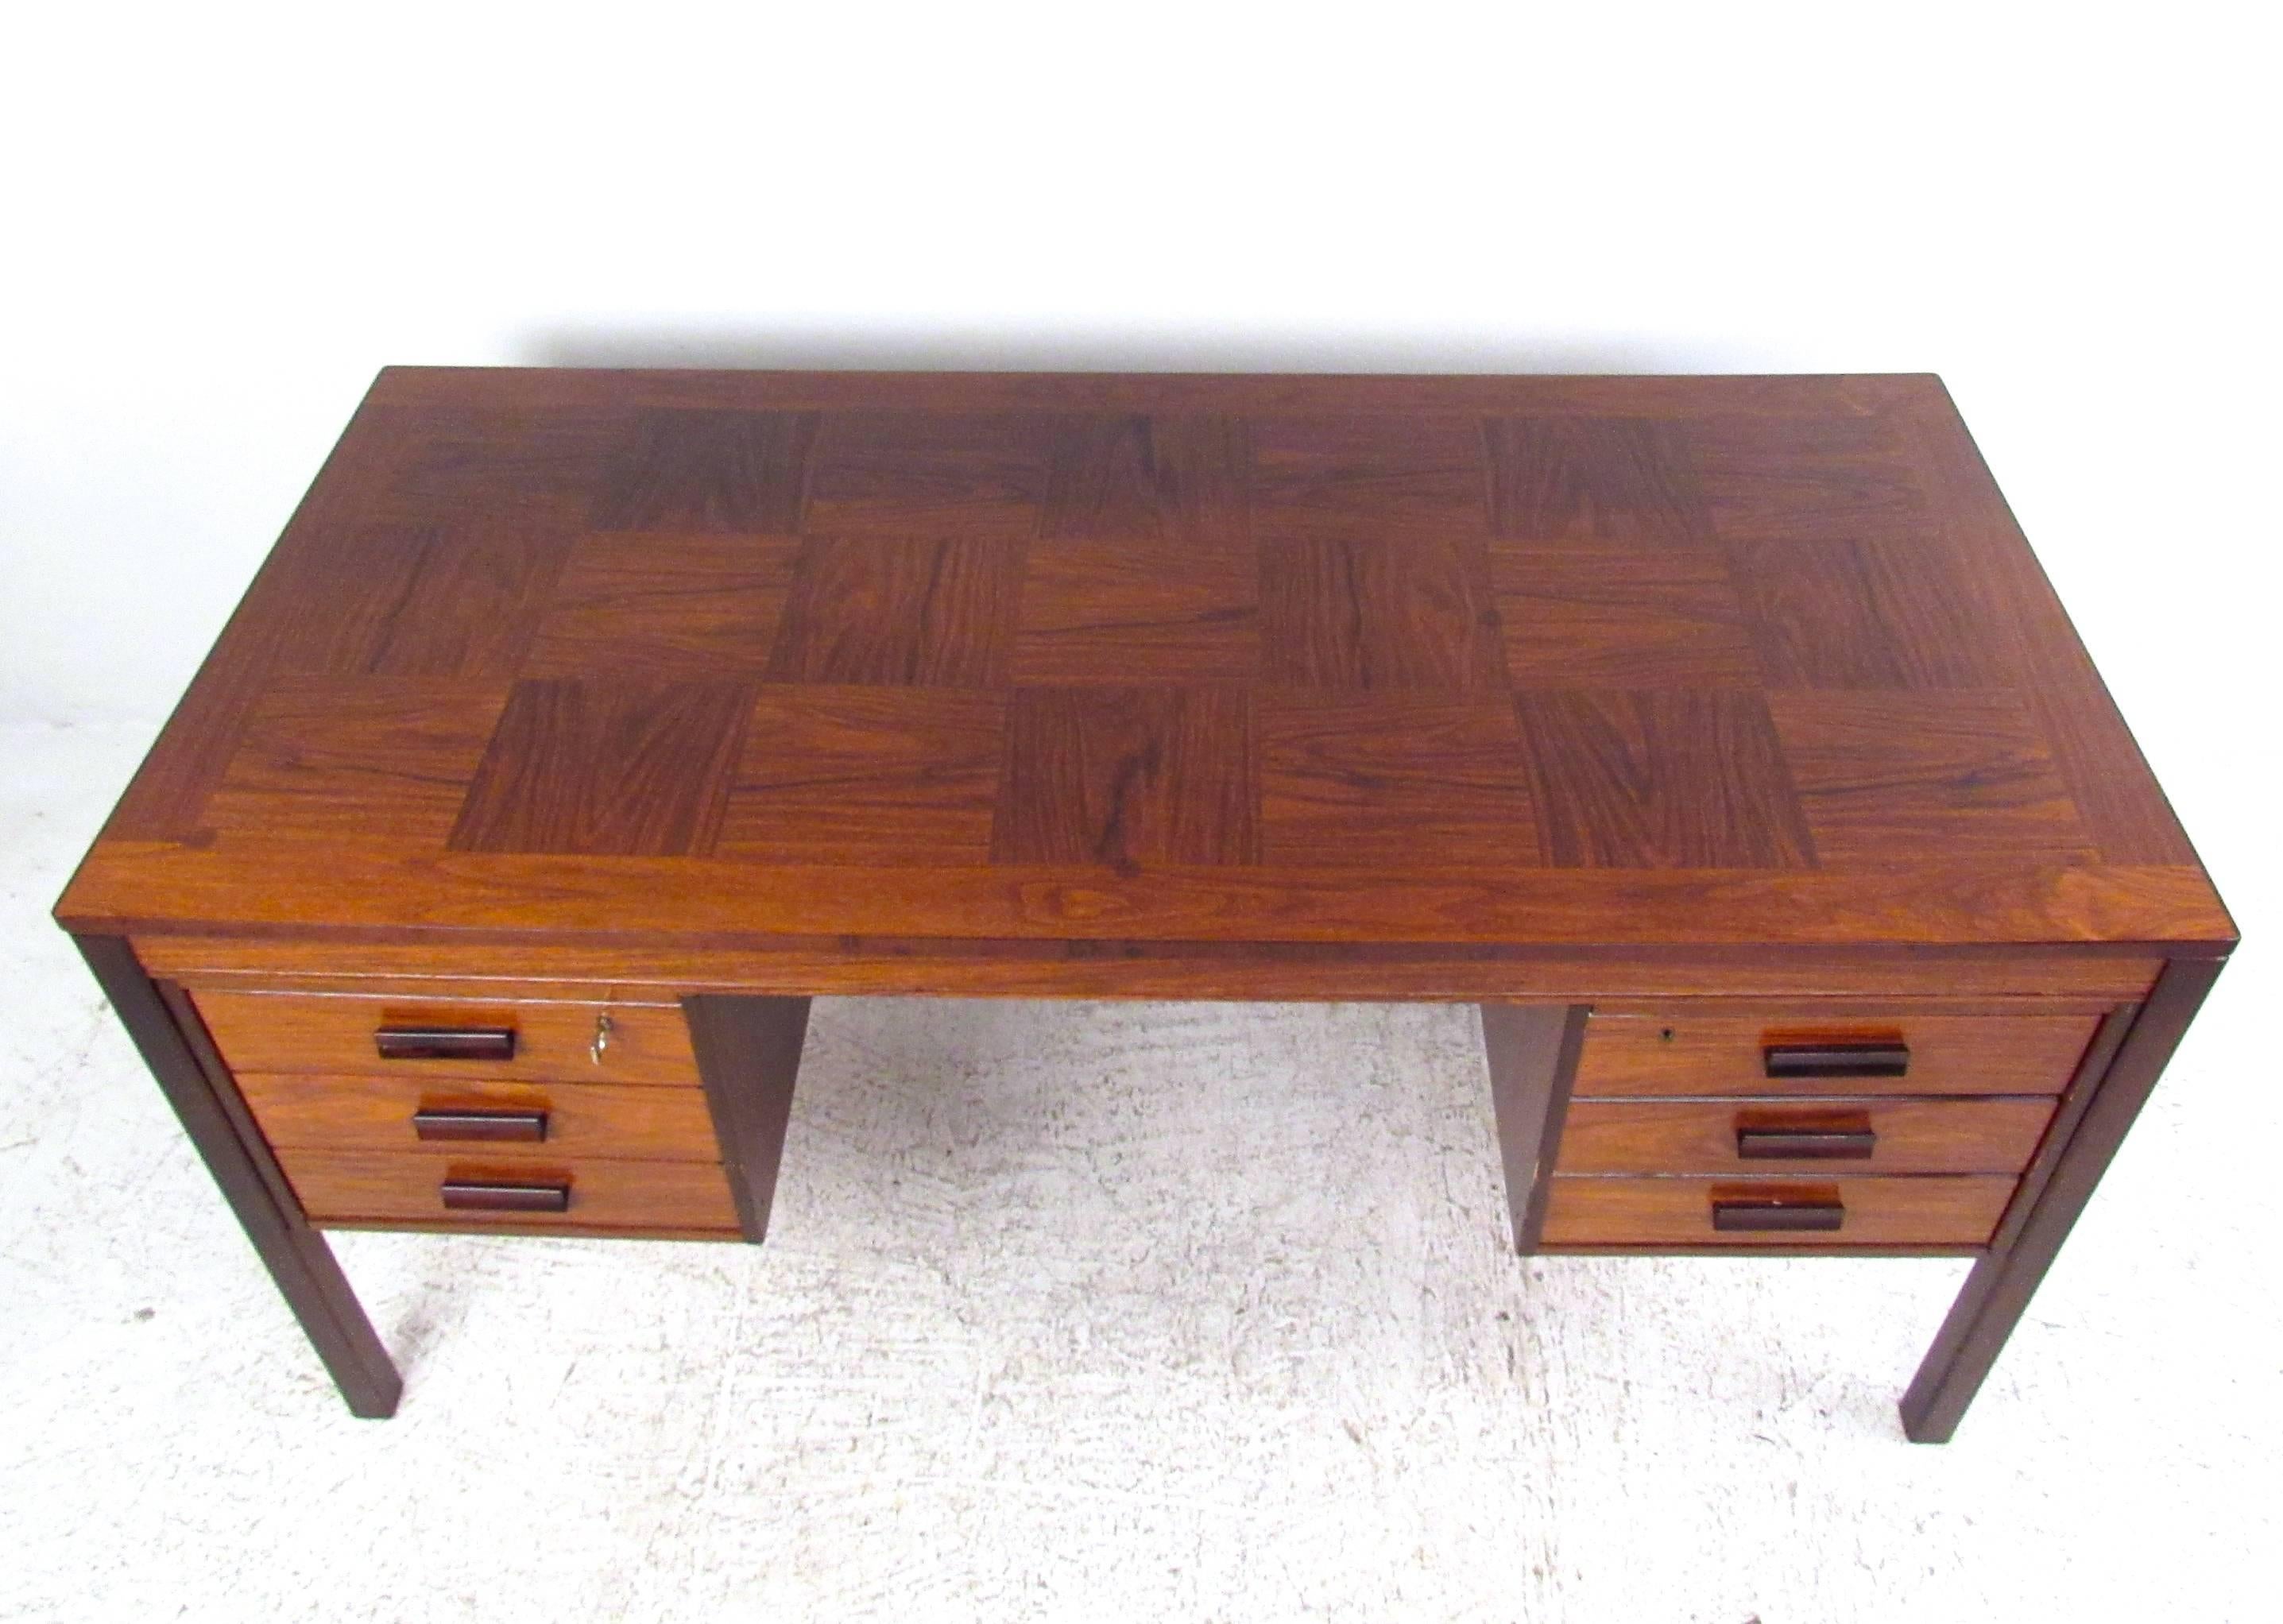 This beautiful vintage desk features unique two-tone construction including rosewood and teak components. Locking drawers (key included), sculpted handles and wonderful marquetry top add to the vintage charm of this Mid-Century writing desk. Please